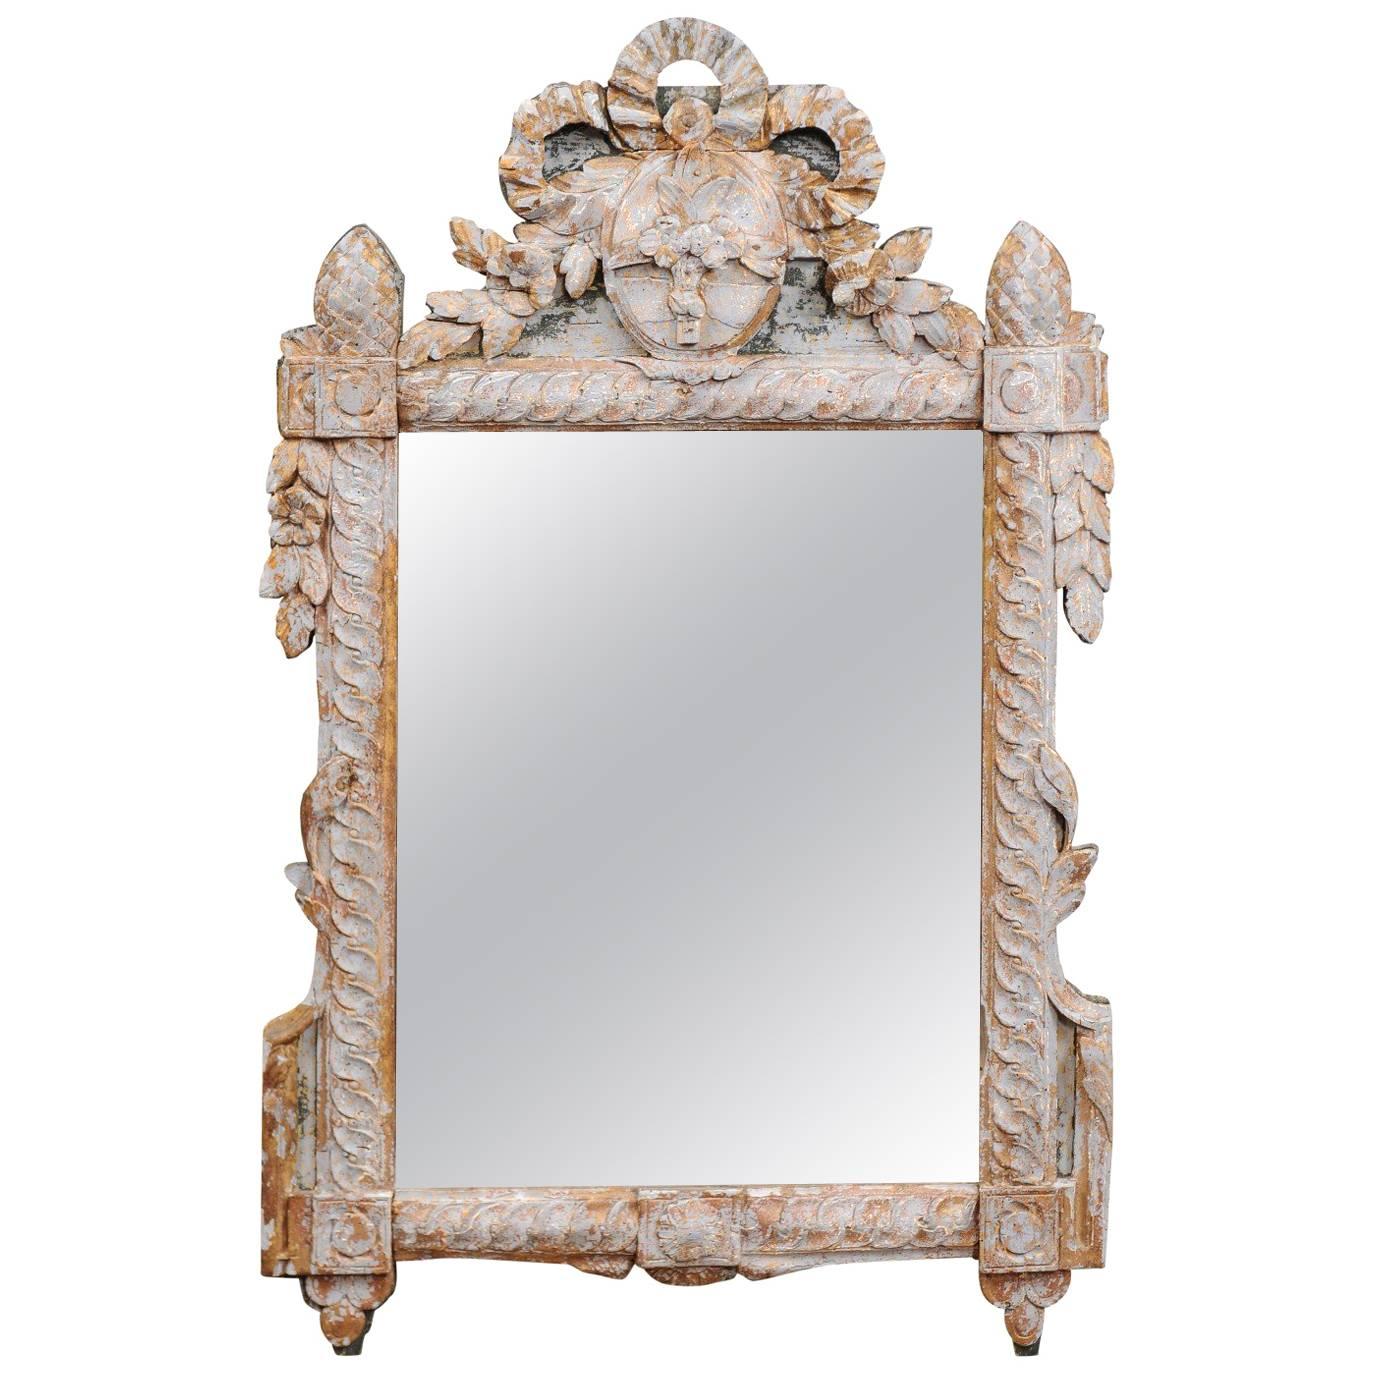 18th Century French Louis XVI Giltwood Mirror with Rubbed Blue Paint